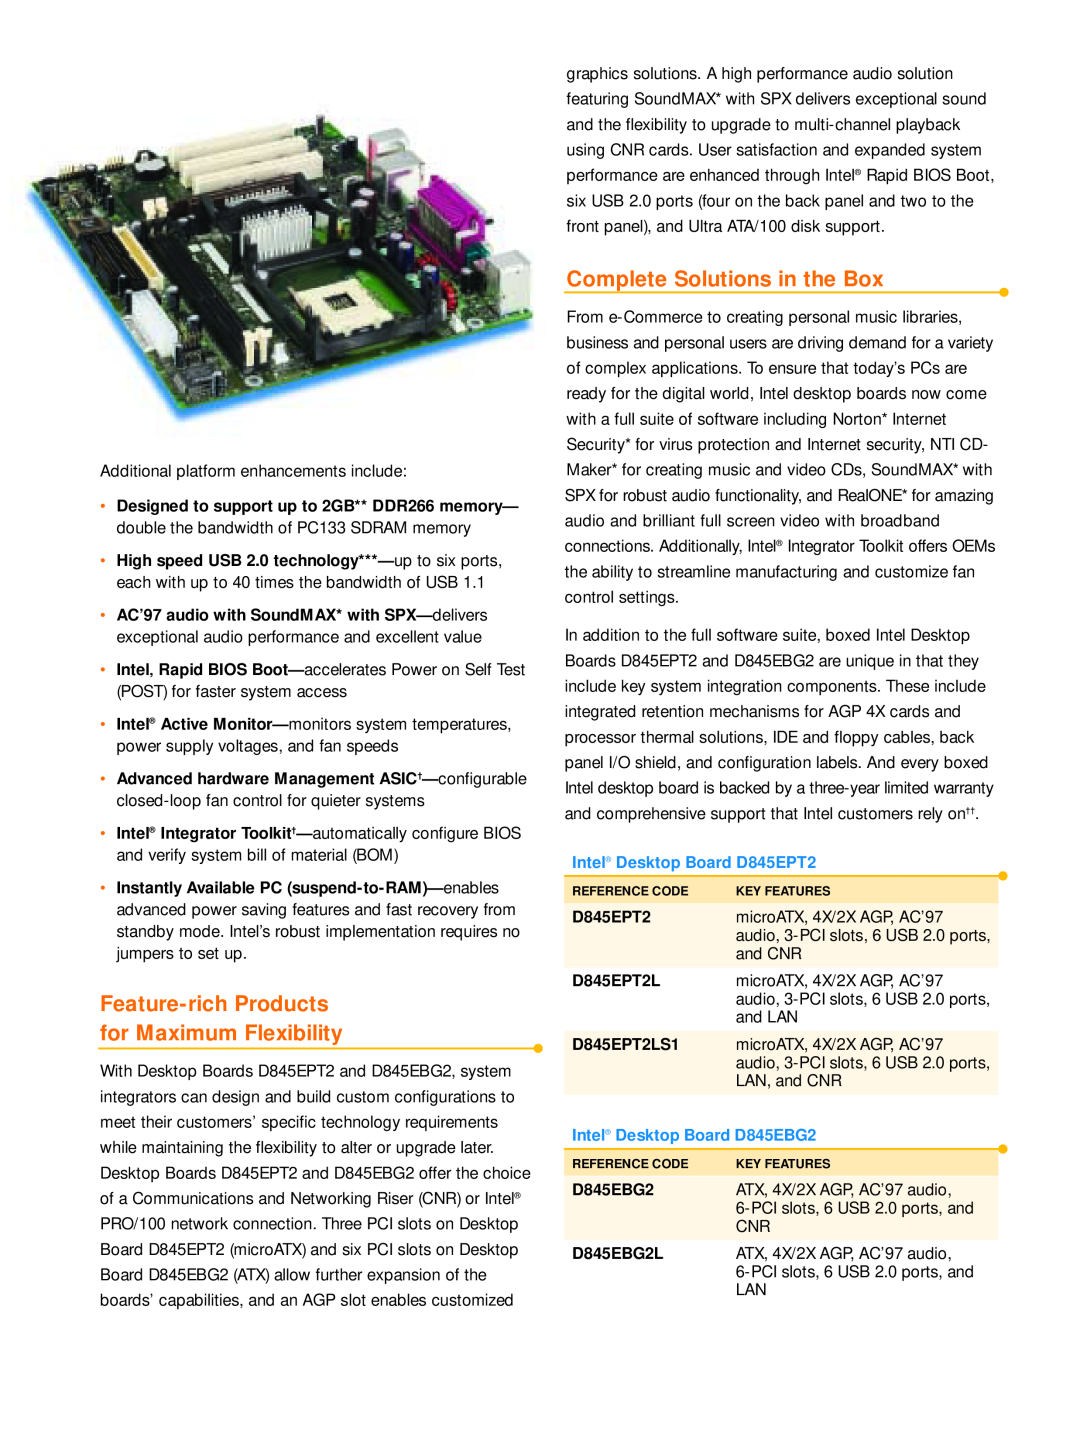 Intel manual Feature-richProducts for Maximum Flexibility, Complete Solutions in the Box, Intel Desktop Board D845EPT2 